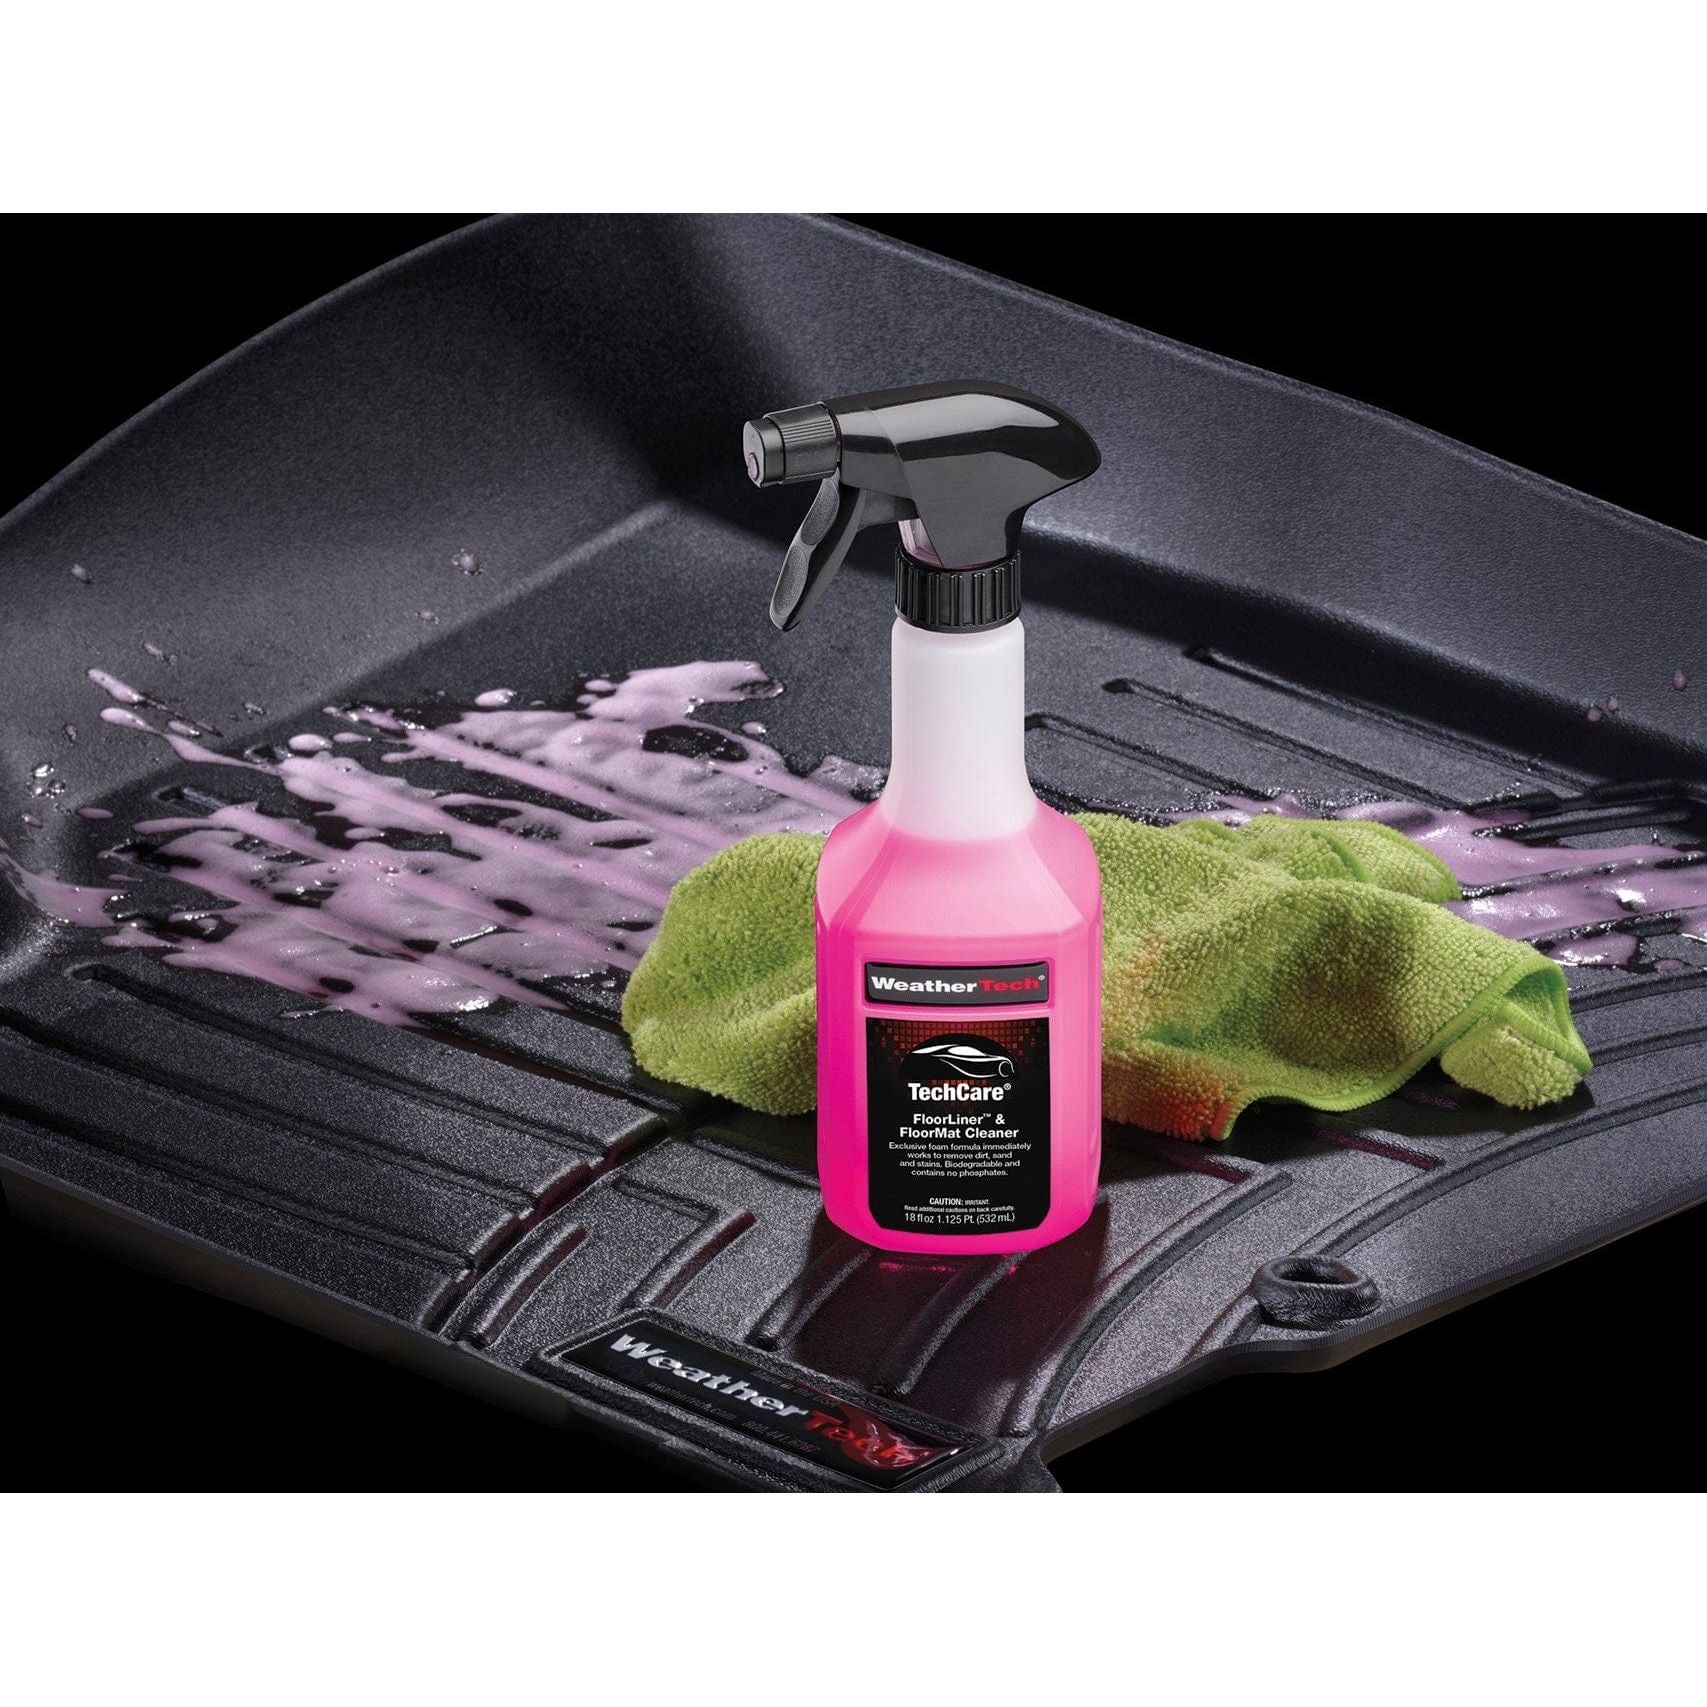 WeatherTech Cleaning and Finishing Spray liquids for cleaning Car mats and Cargo Liners